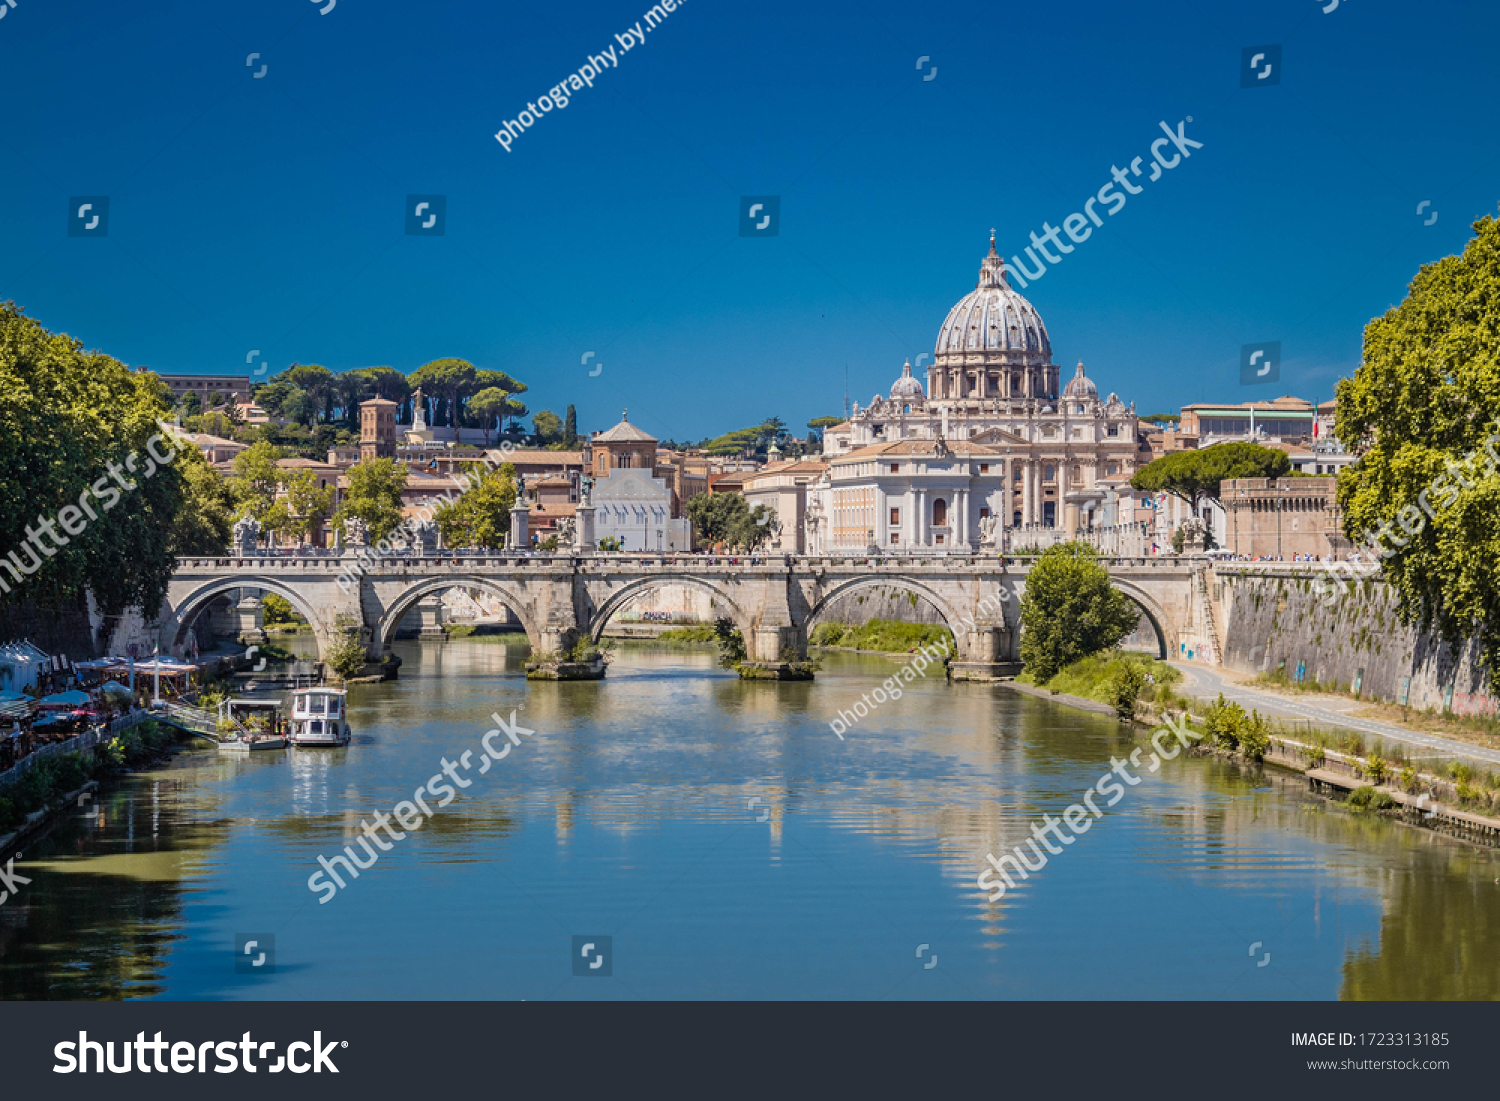 St peter's basilica in rome with the tiber #1723313185